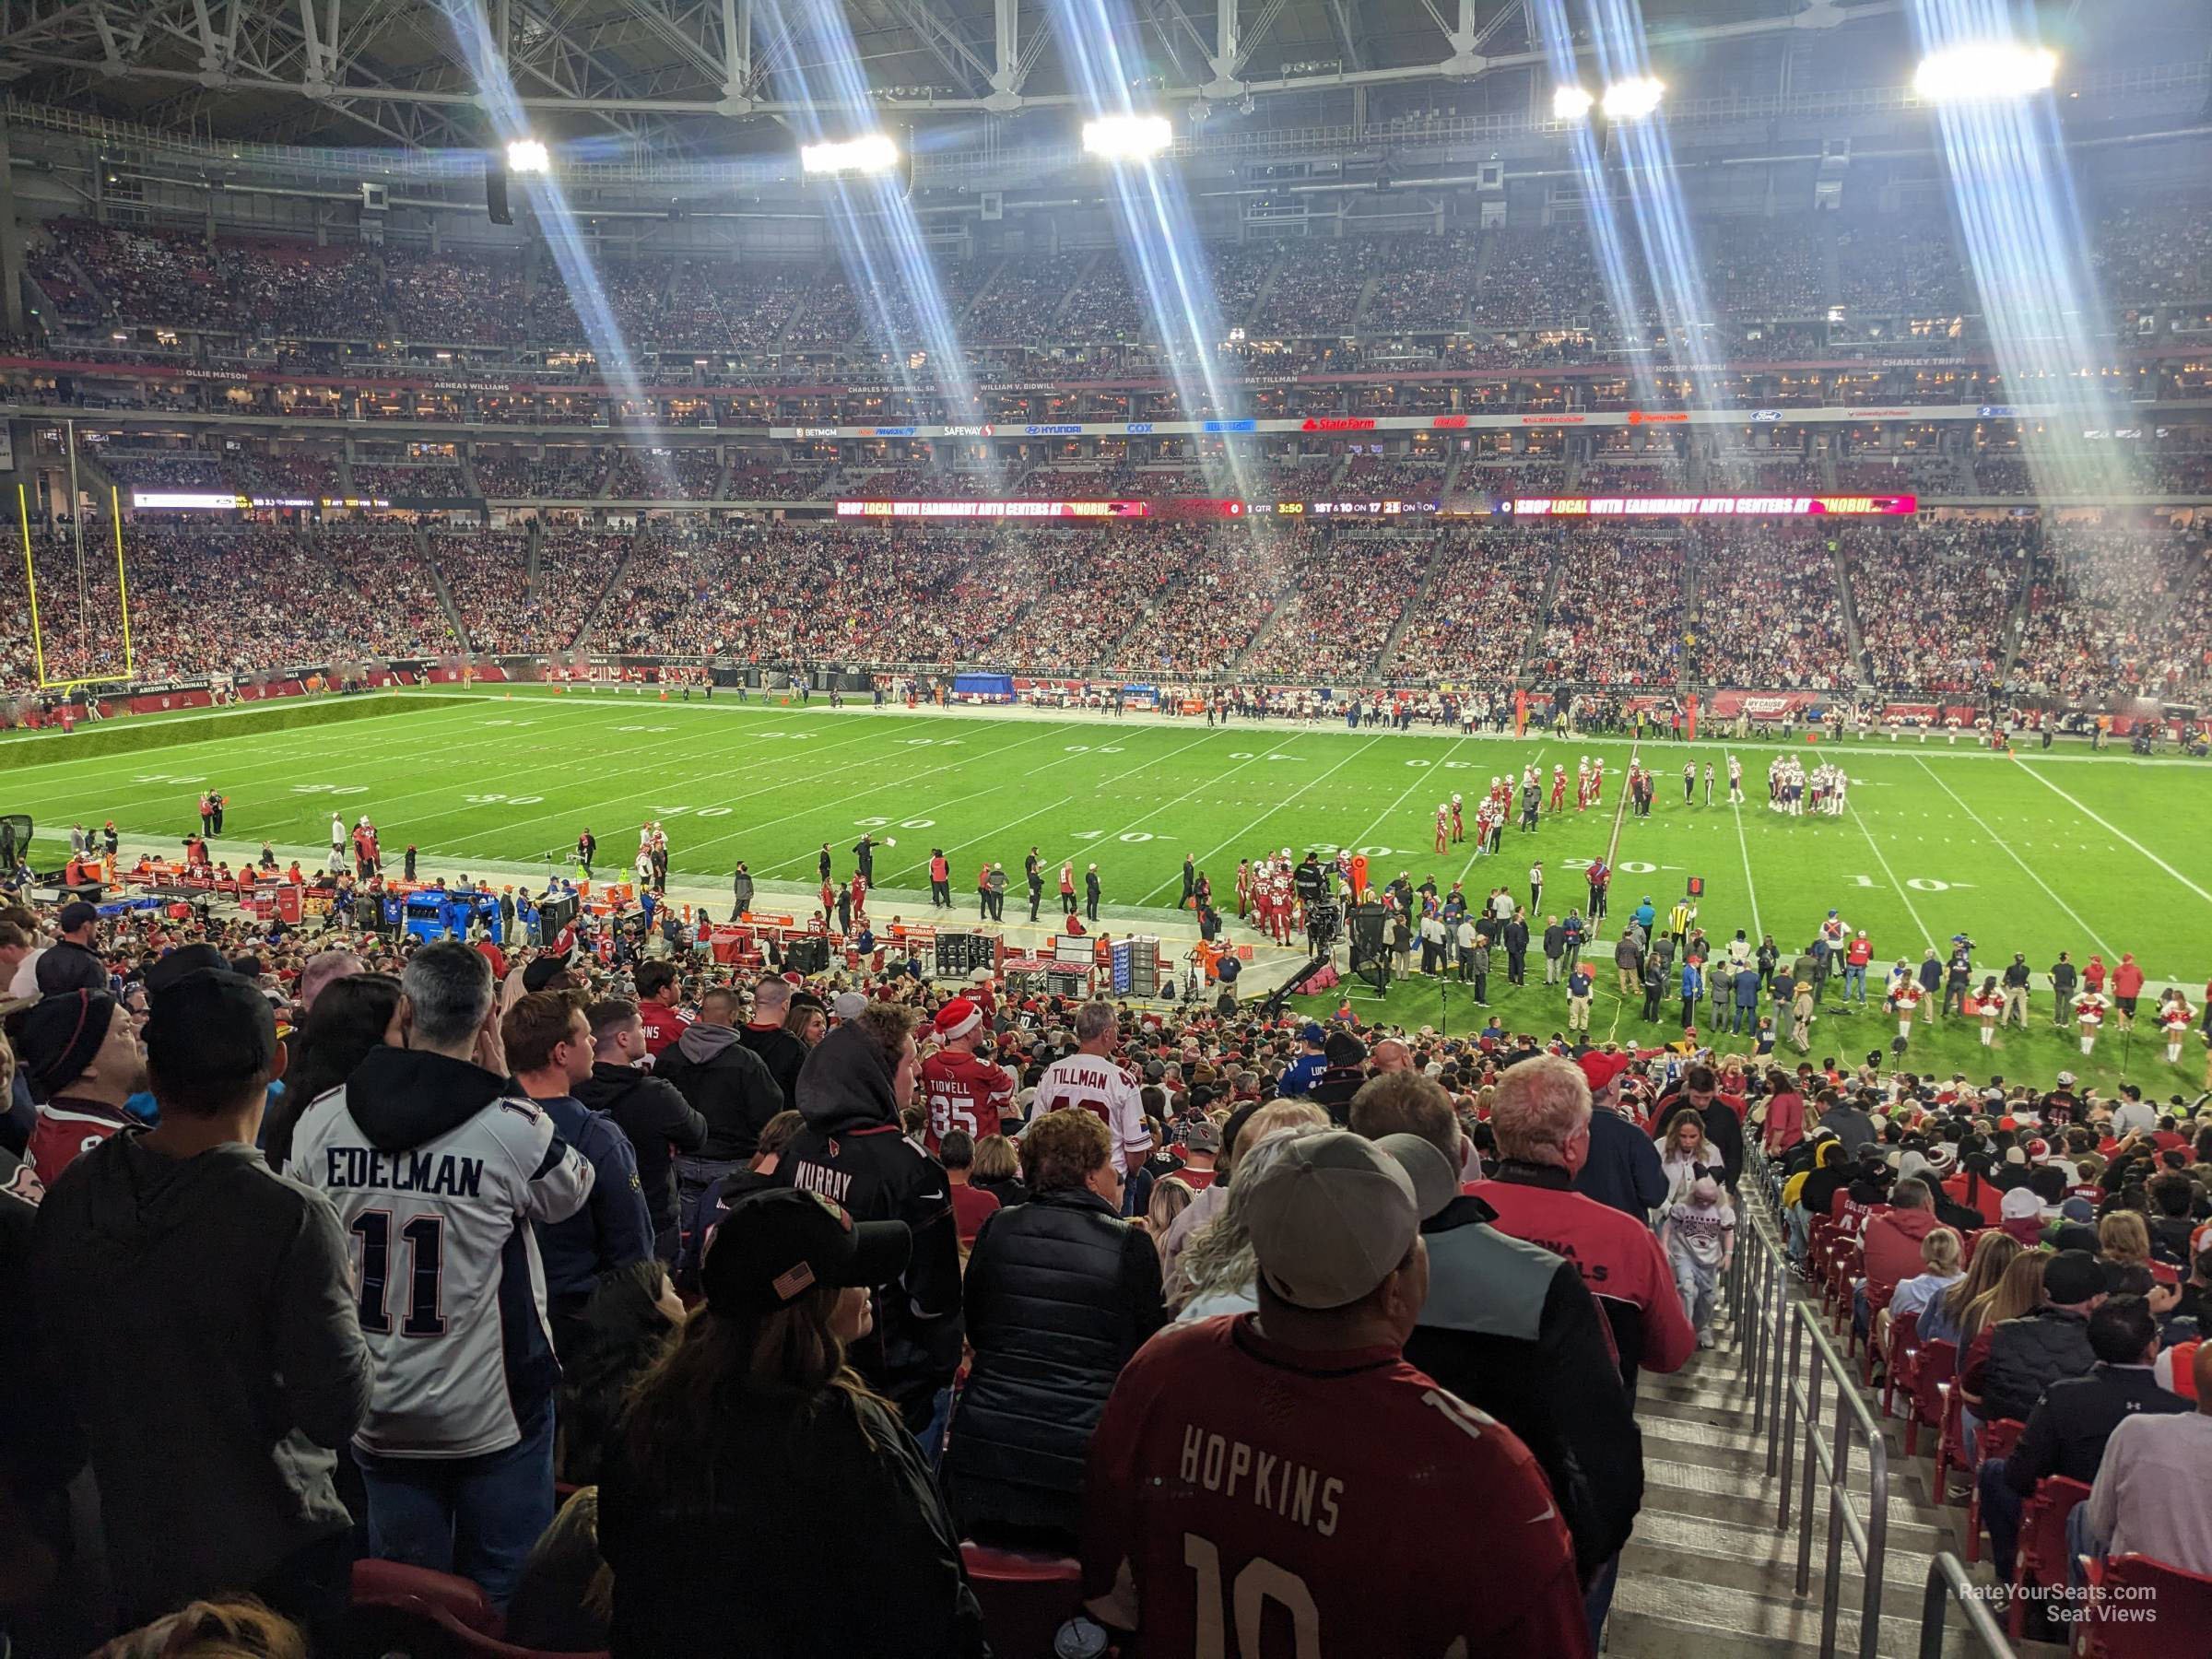 section 106, row 41 seat view  for football - state farm stadium